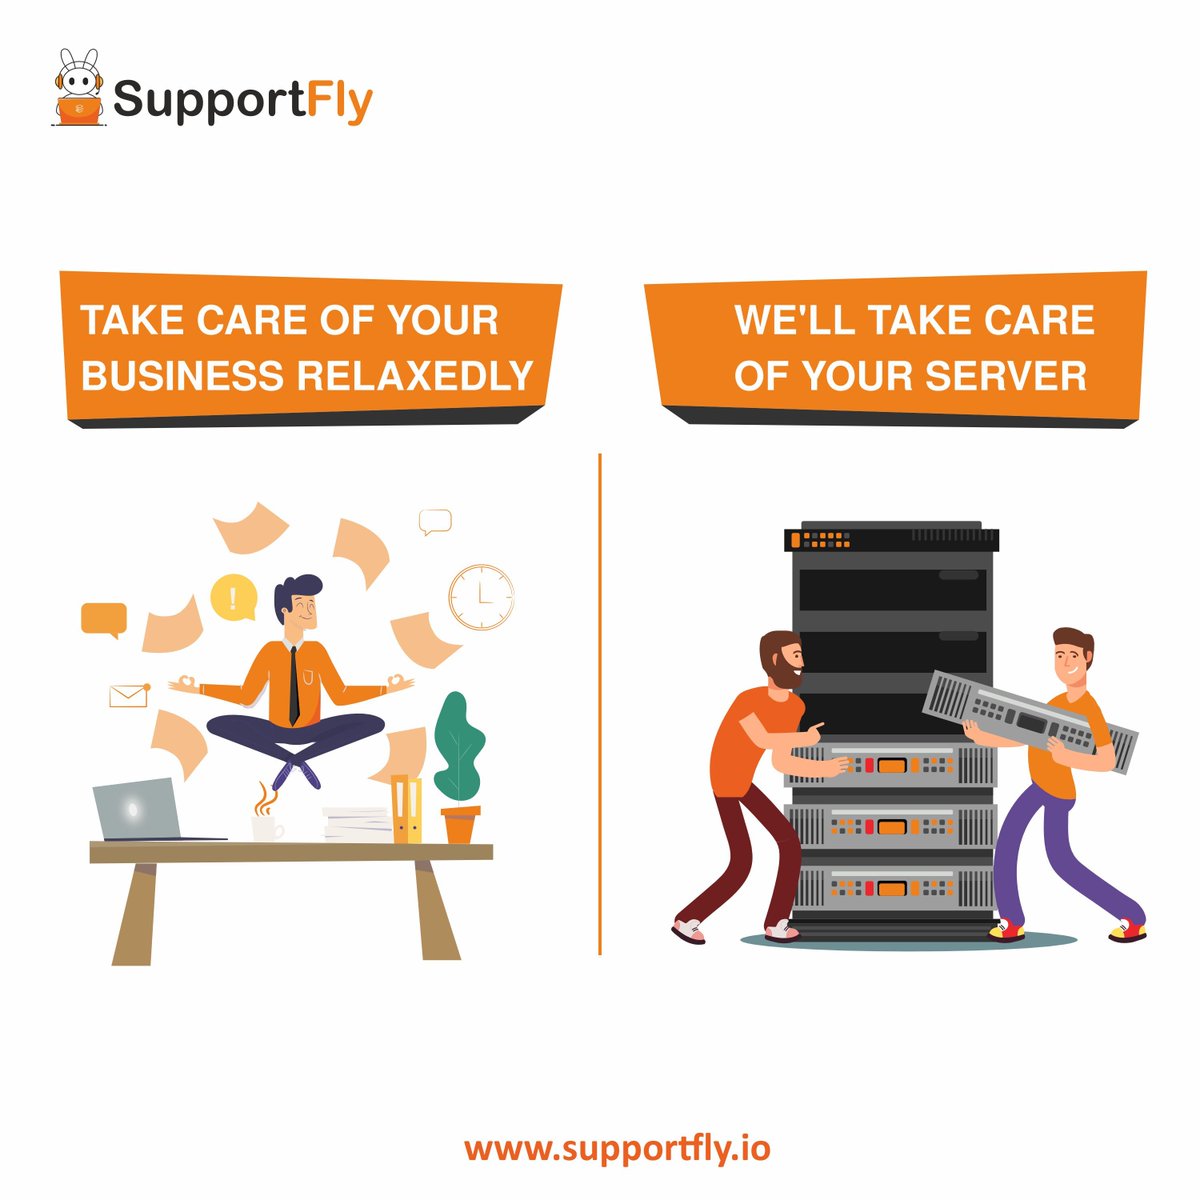 Focus on growing your business while we handle the tech. SupportFly provides the support you need so you can relax and take care of business stress-free!
#server #servermanagement #serverexpert  #serversolution #24x7support #serverprovider  #serversolutions #supportfly #servers